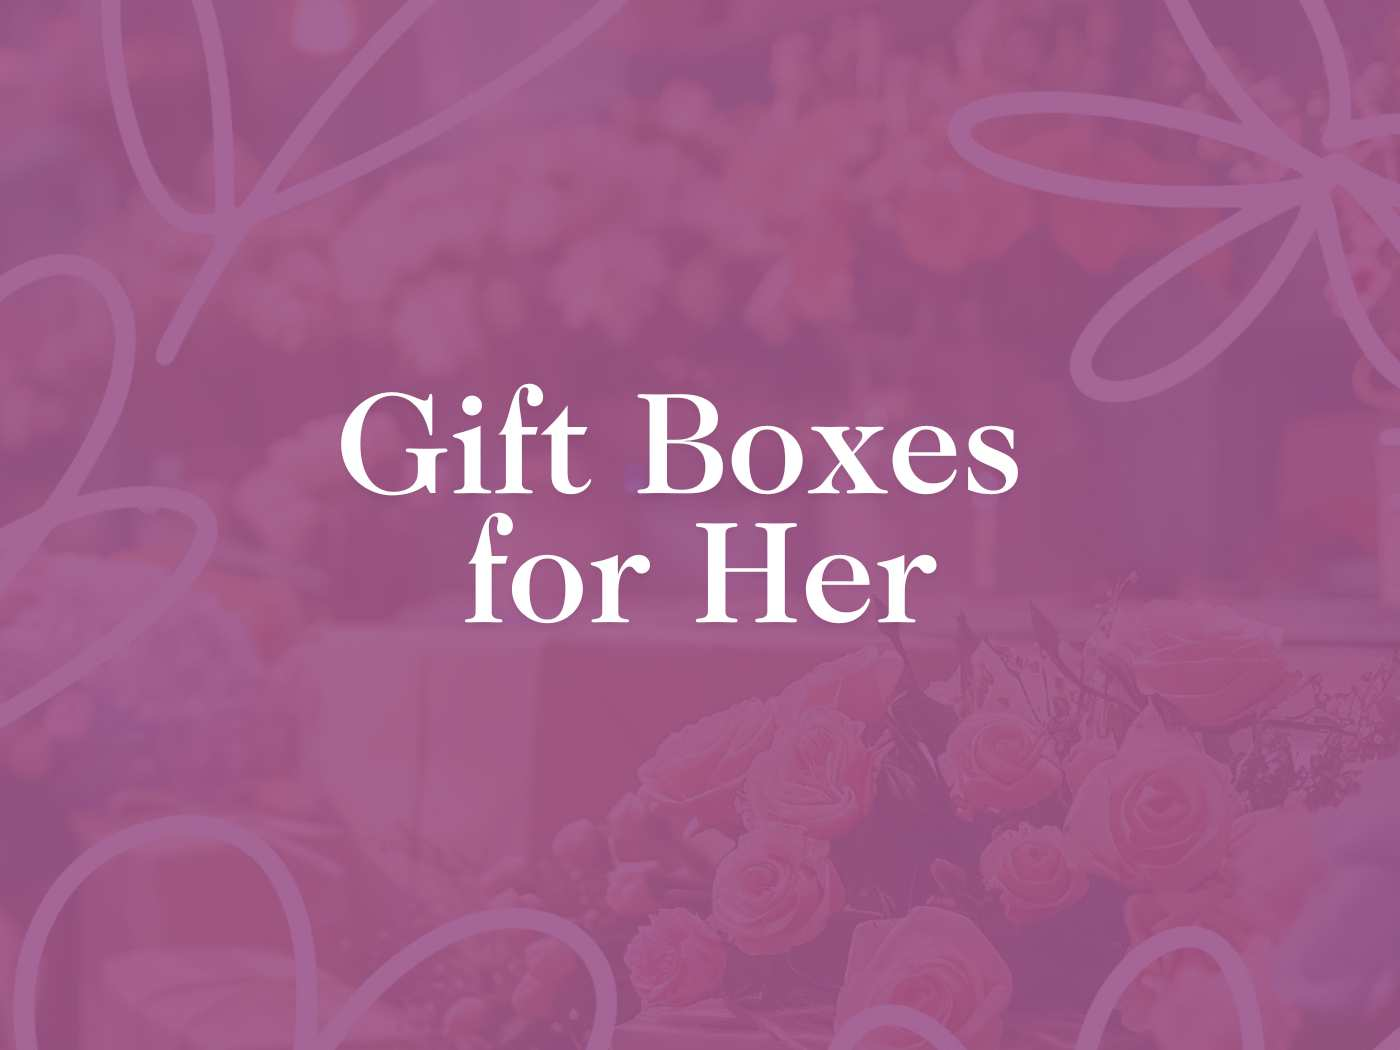 A decorative display of gift boxes surrounded by flowers, representing the Gift Boxes for Her Collection - Fabulous Flowers and Gifts